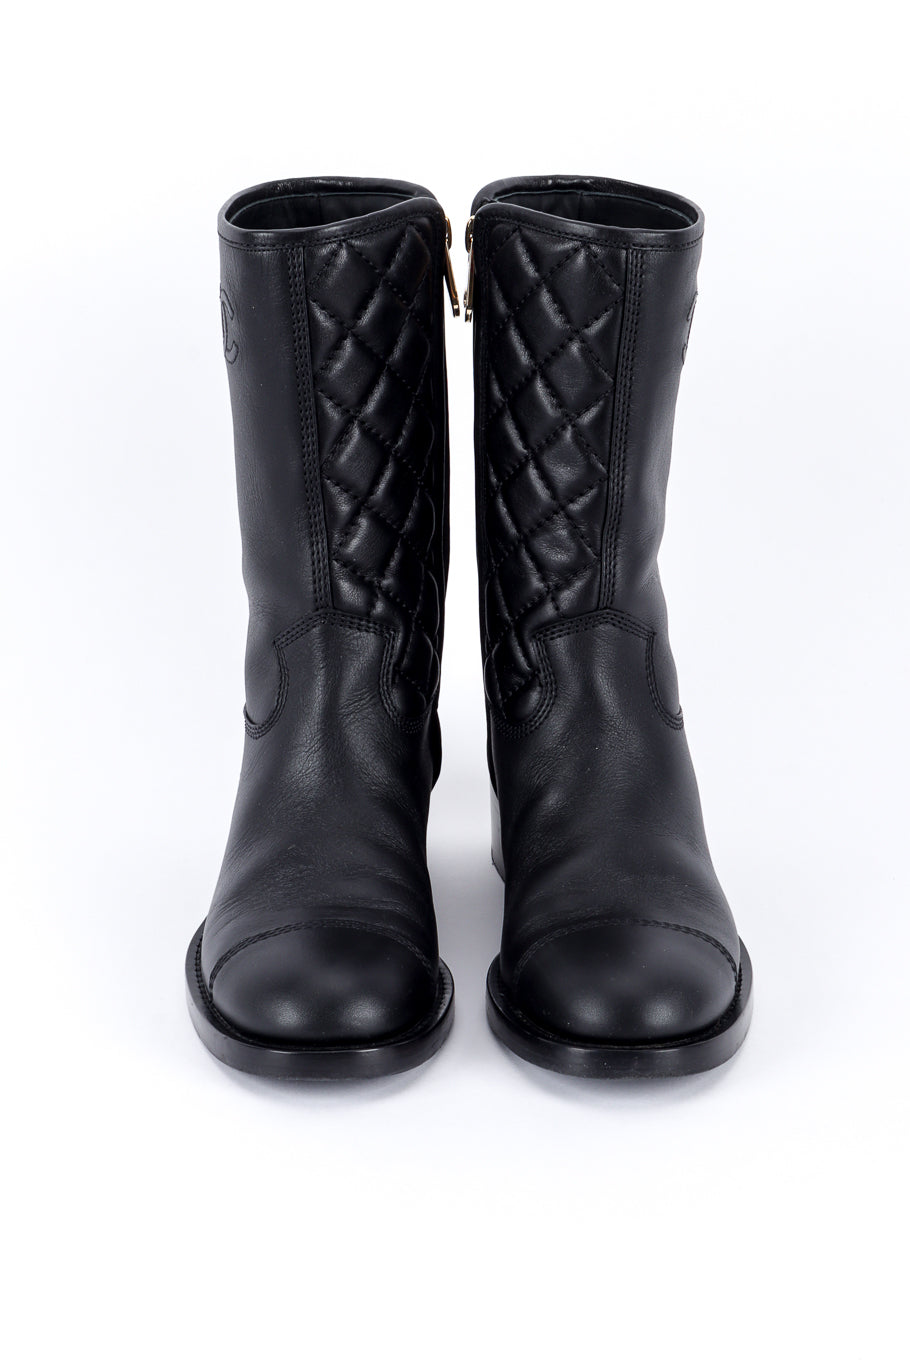 Chanel CC Quilted Mid-Calf Boots front @recess la